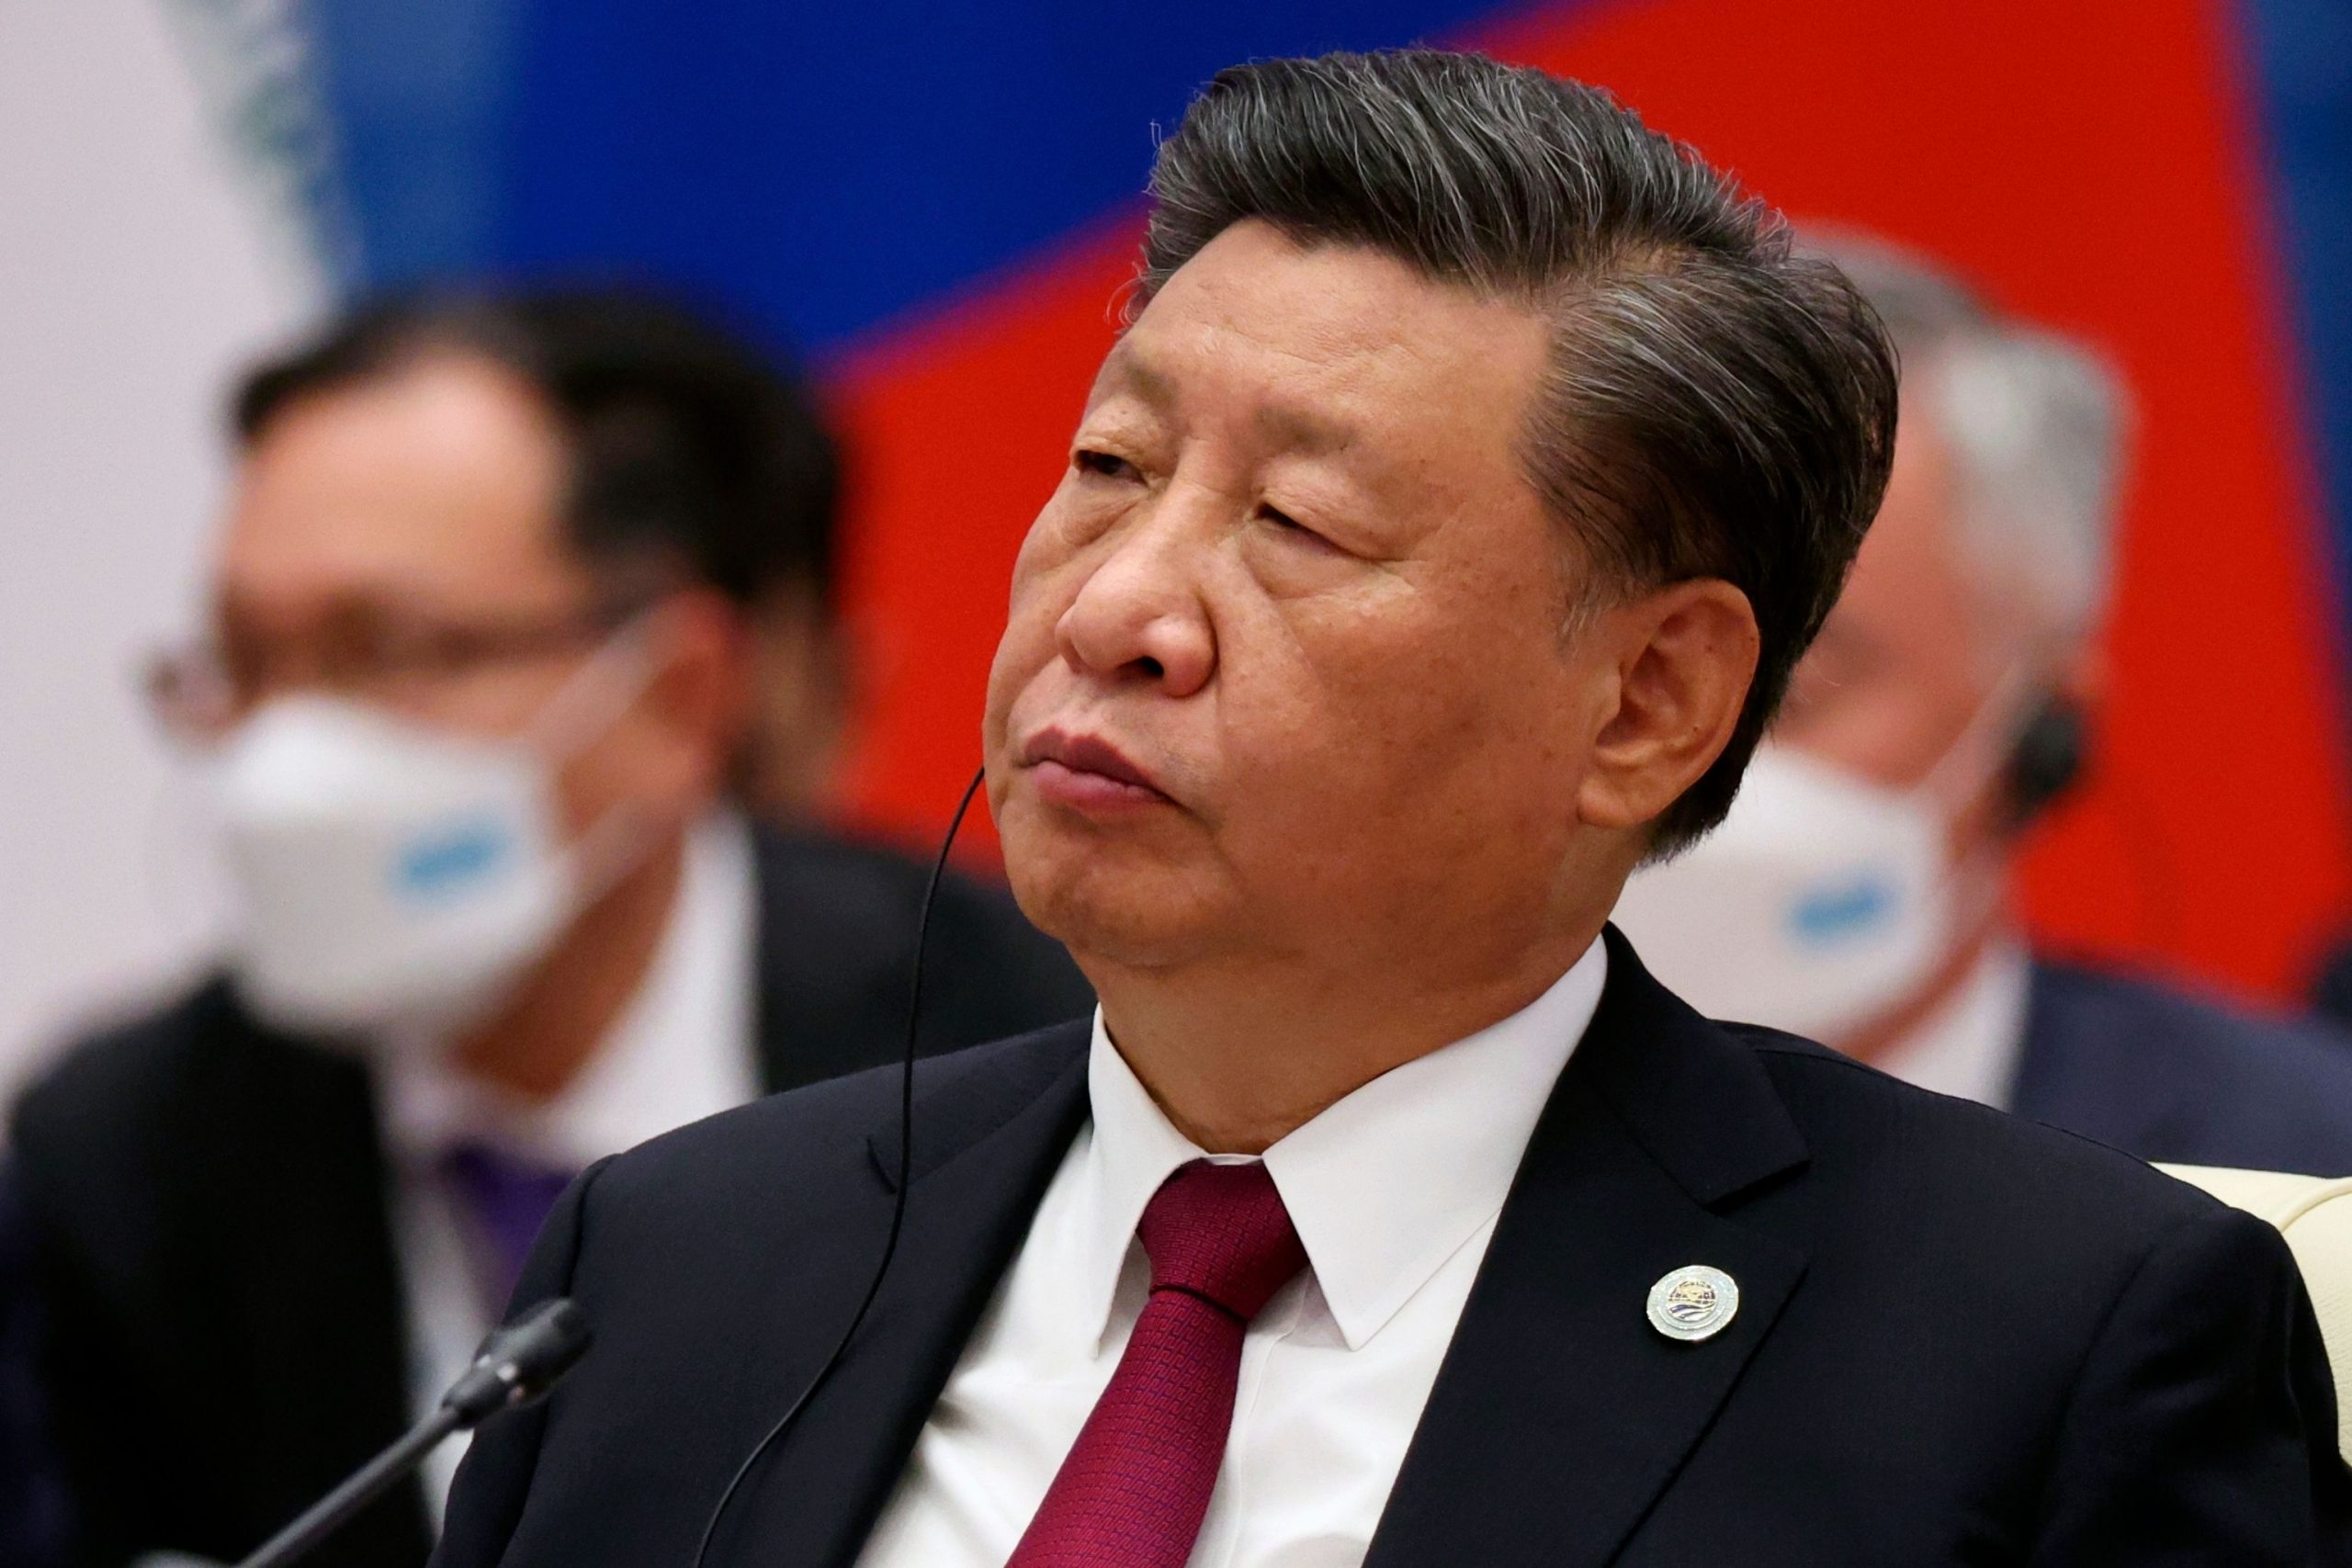 Chinese president Xi Jinping coup rumours refuted, see pics